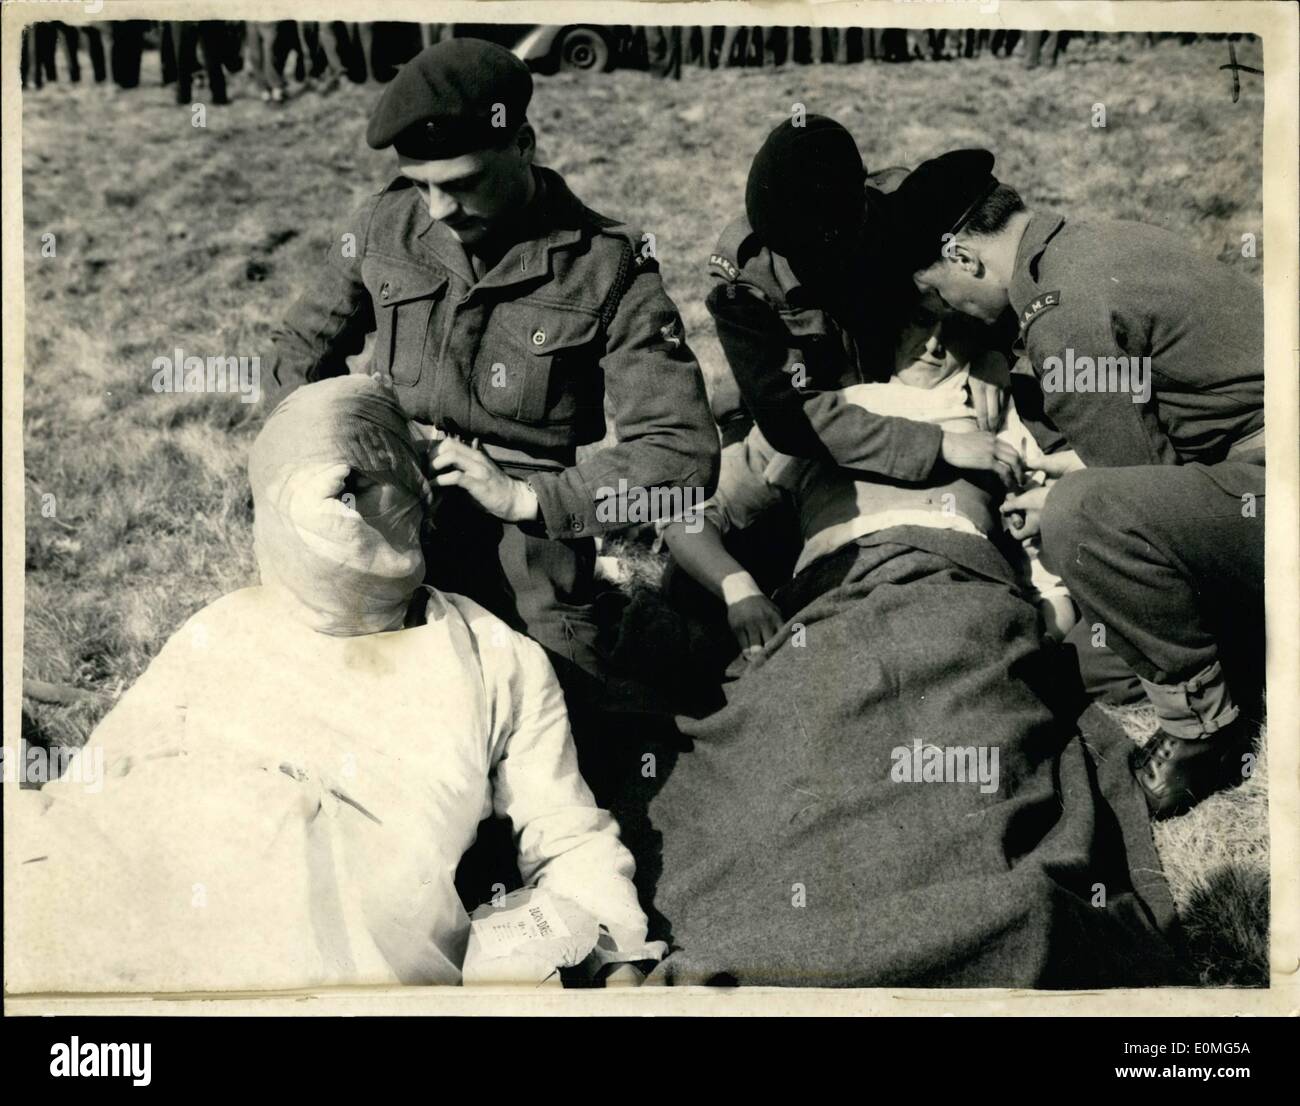 Apr. 04, 1955 - Army Officers Receive First Aid Instruction For Atomic Warfare: Withe the revolution in military strategy brought about by the development of atomic weapons more and more Army units are being trained in the first aid and rescue work that has hitherto been the province of Civil Defence. The first of these special first aid course for junior officers and senior N.C.O. a was held today at the Ewshot Camp, near Aldershot. On the completion of their course they will return to their as instructor in first aid, with special reference to atomic warfare Stock Photo